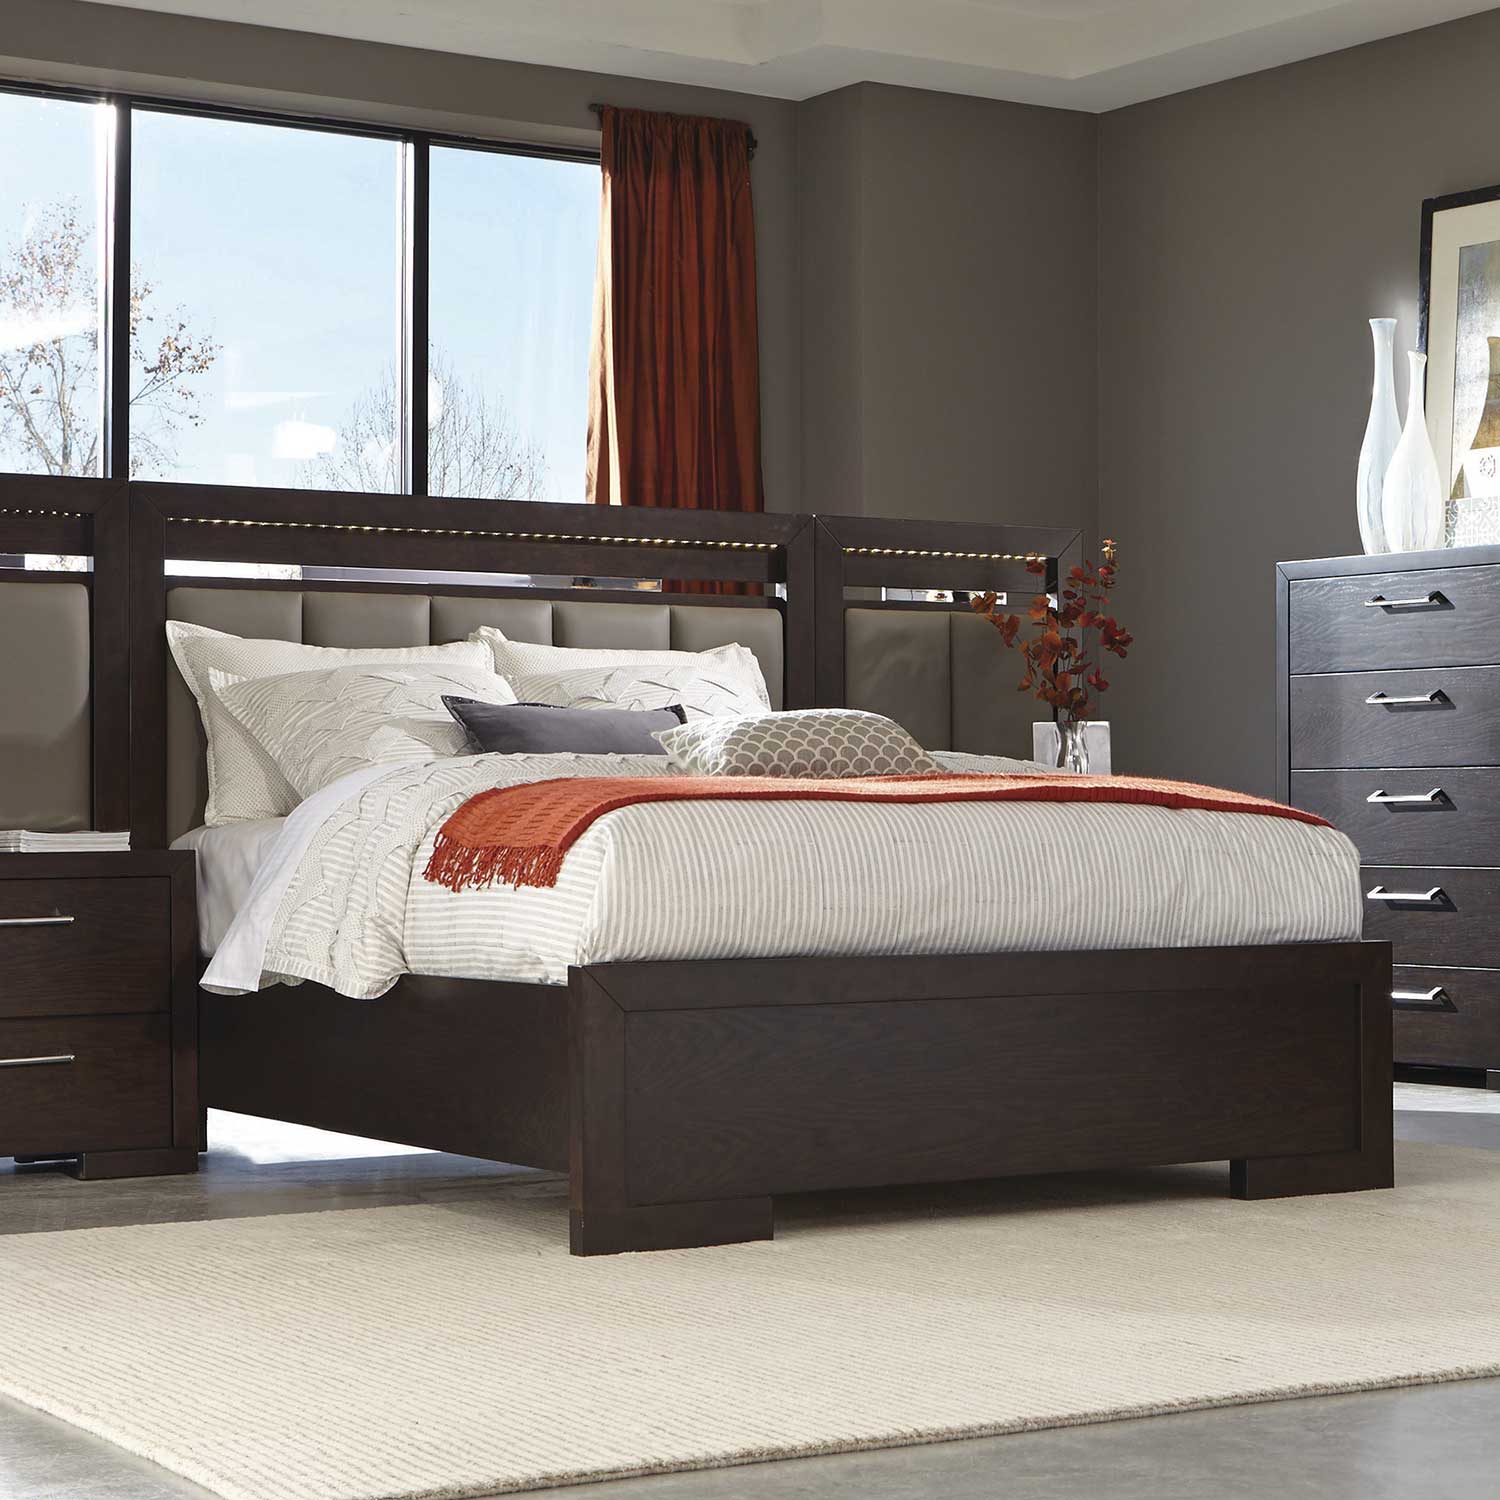 Coaster Berkshire Lighted Panel bed - Bitter Chocolate